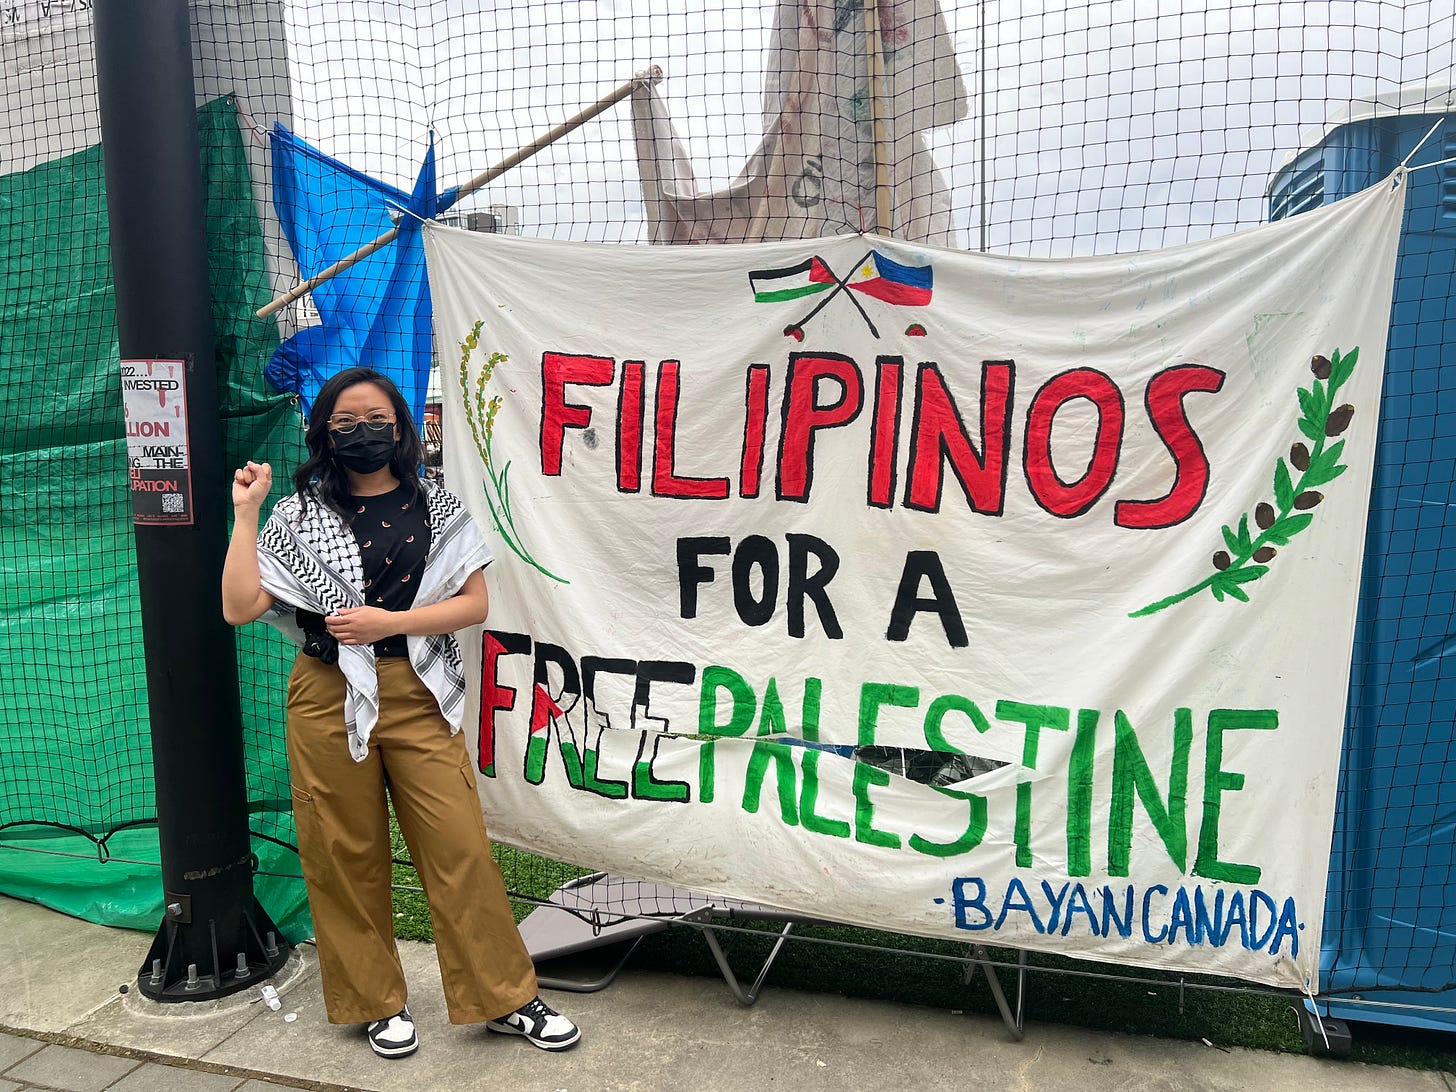 Author Justine Yu, wearing brown pants, a black patterned shirt, and a keffiyeh, stands next to a large Filipinos for a free Palestine banner, written in red, black, and green.